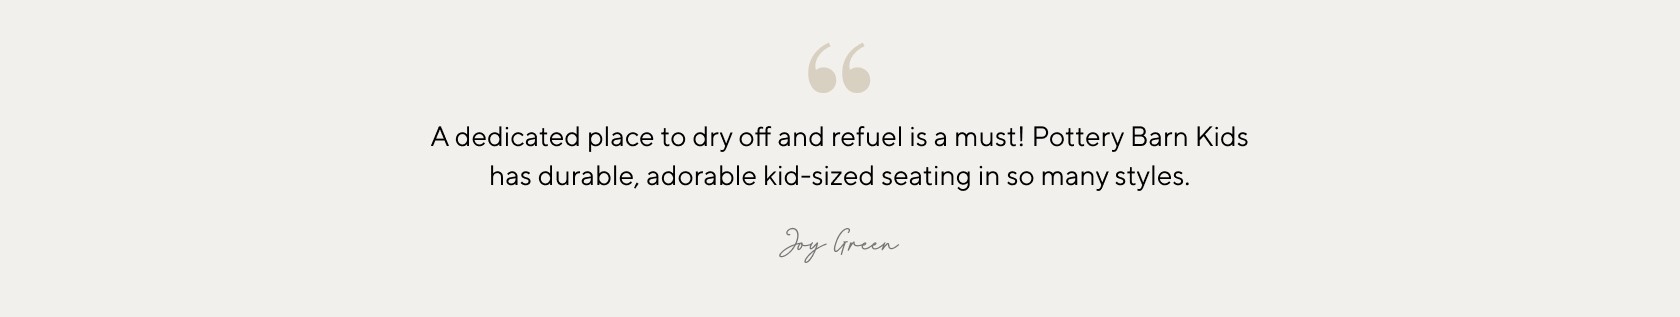 A dedicated place to dry off and refuel is a must! Pottery Barn Kids has durable, adorable kid-sized seating in so many styles.